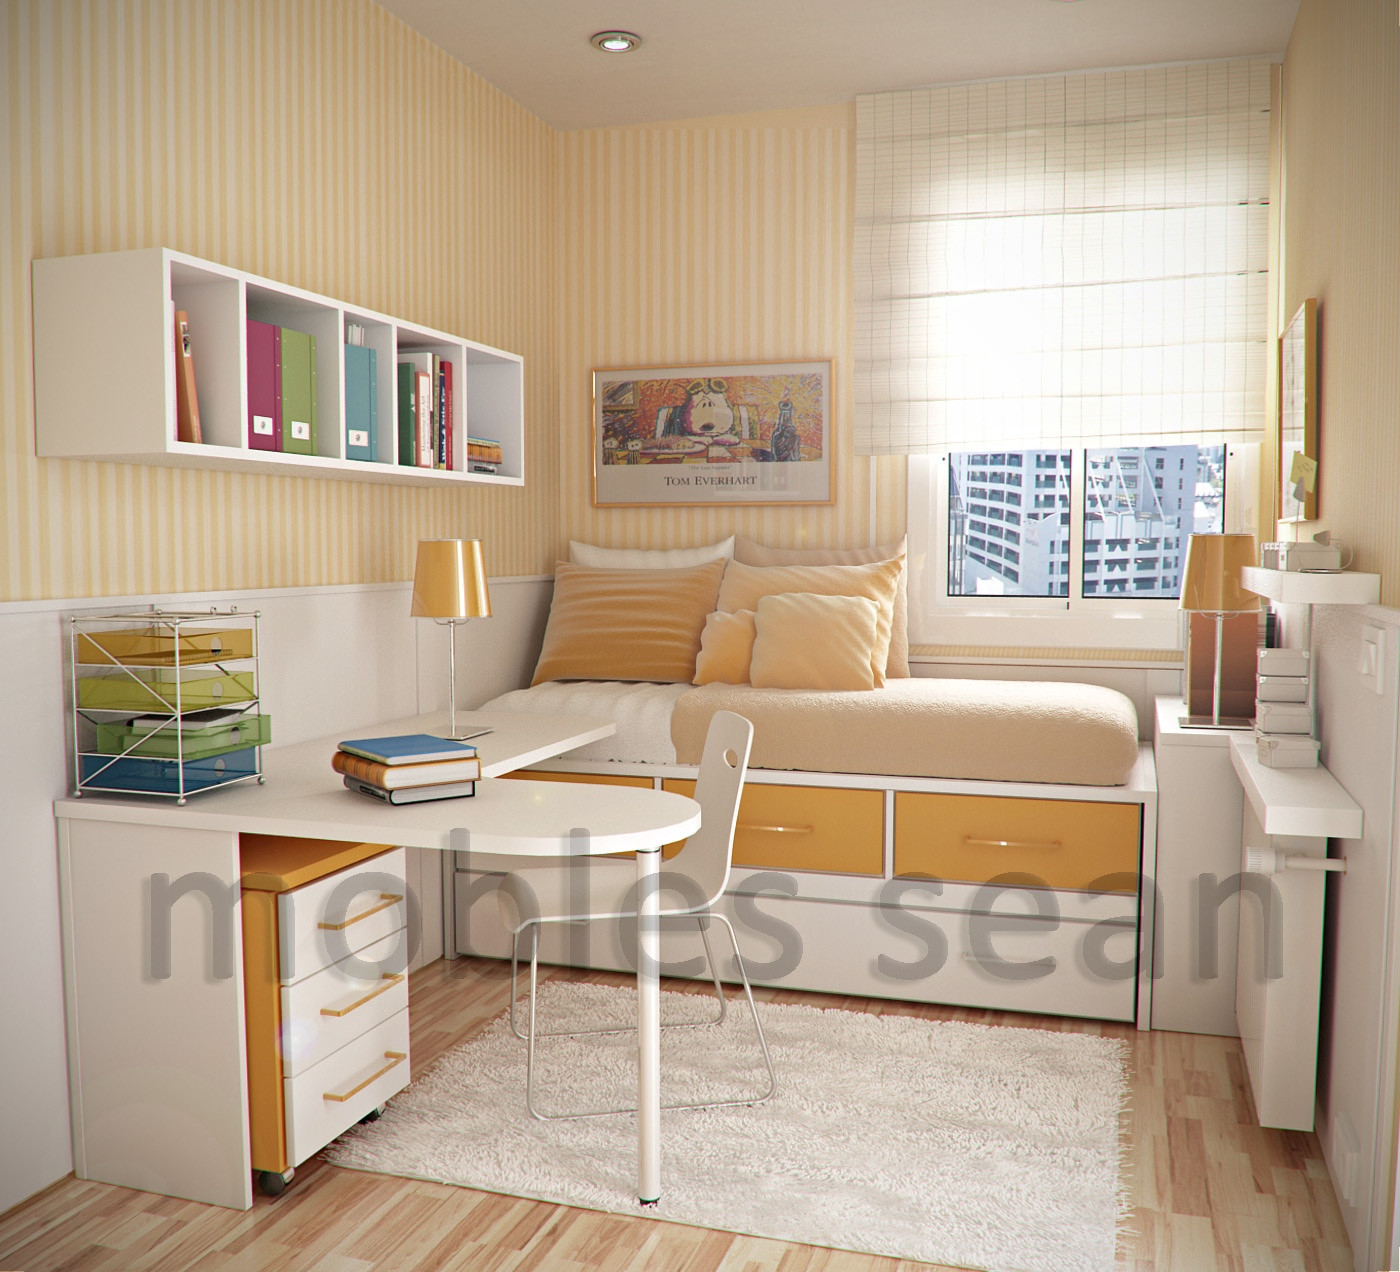 Kids Room Layout
 Space Saving Designs for Small Kids Rooms